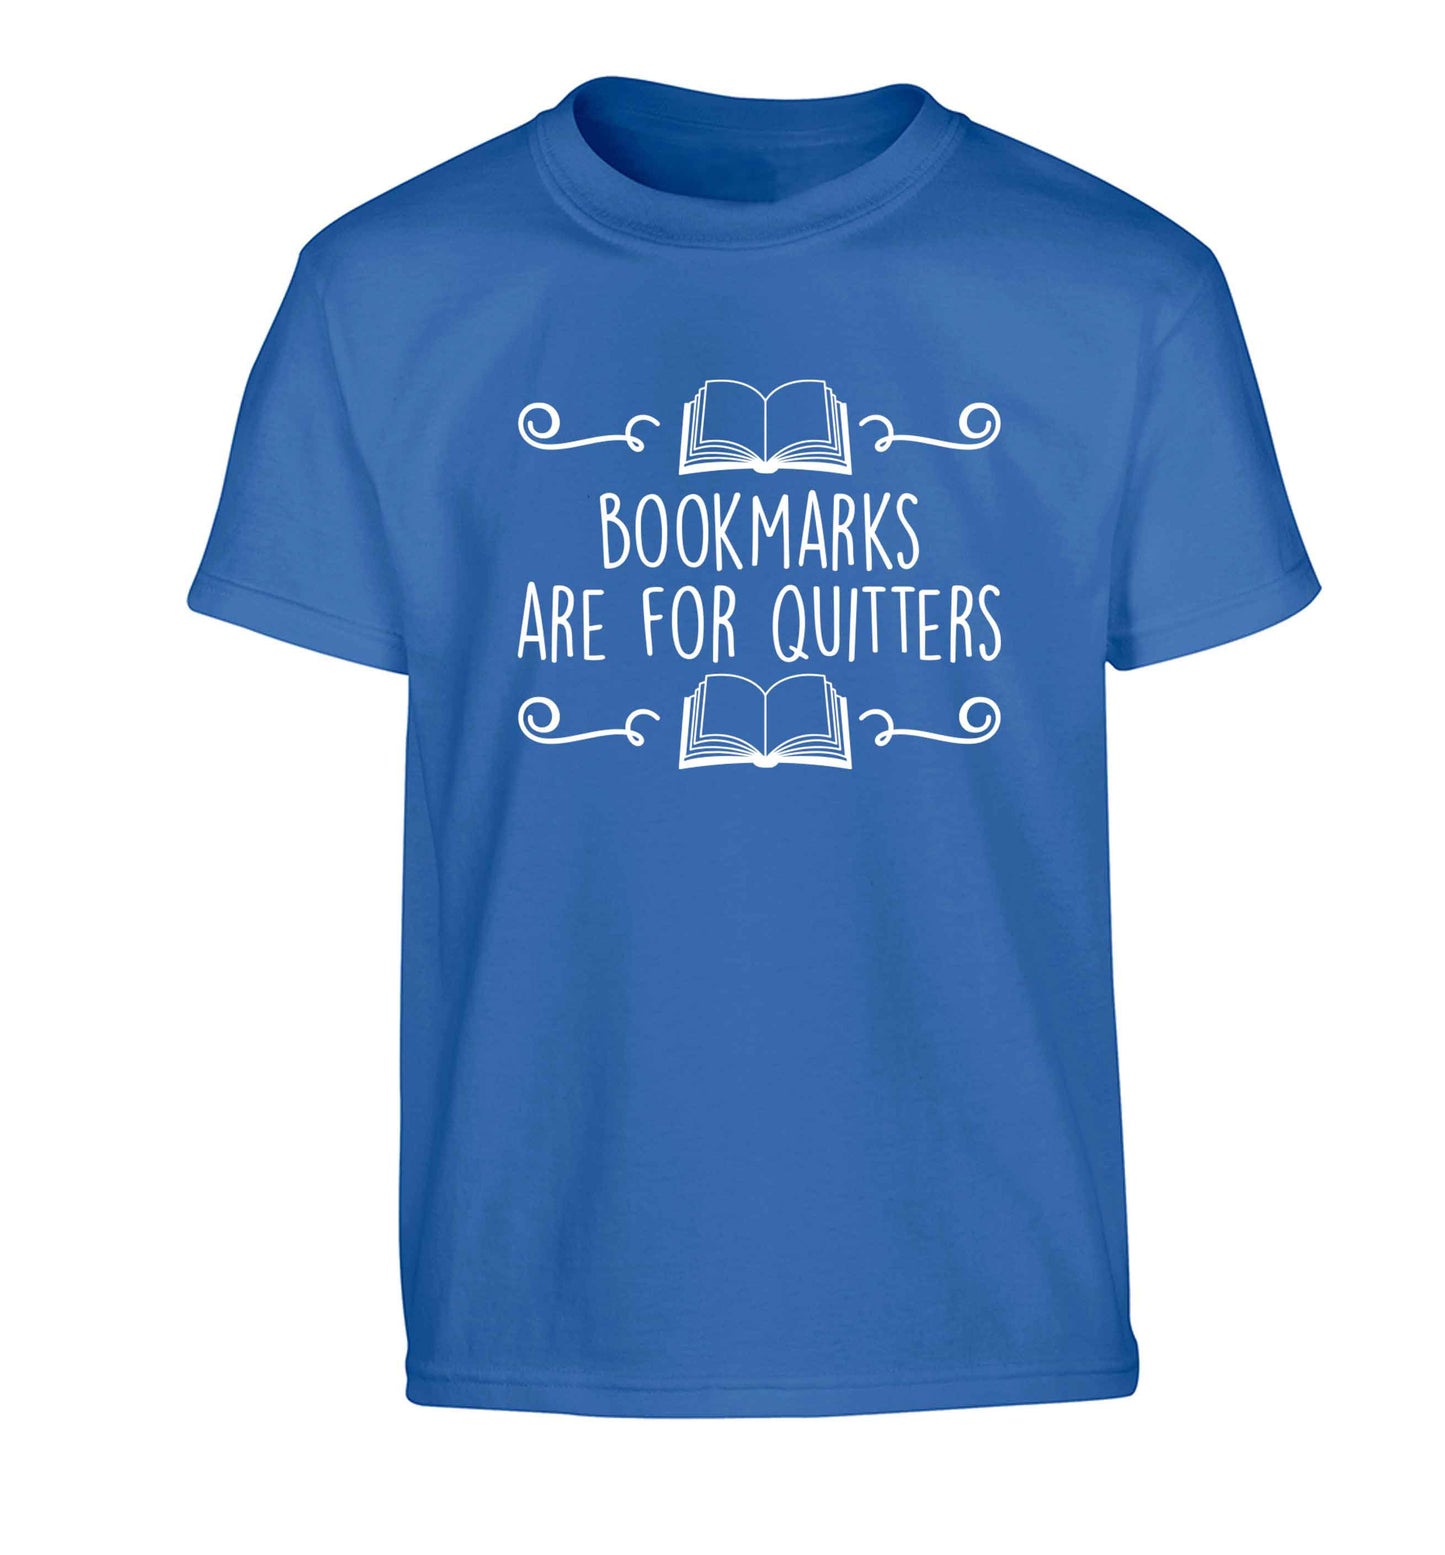 Bookmarks are for quitters Children's blue Tshirt 12-13 Years